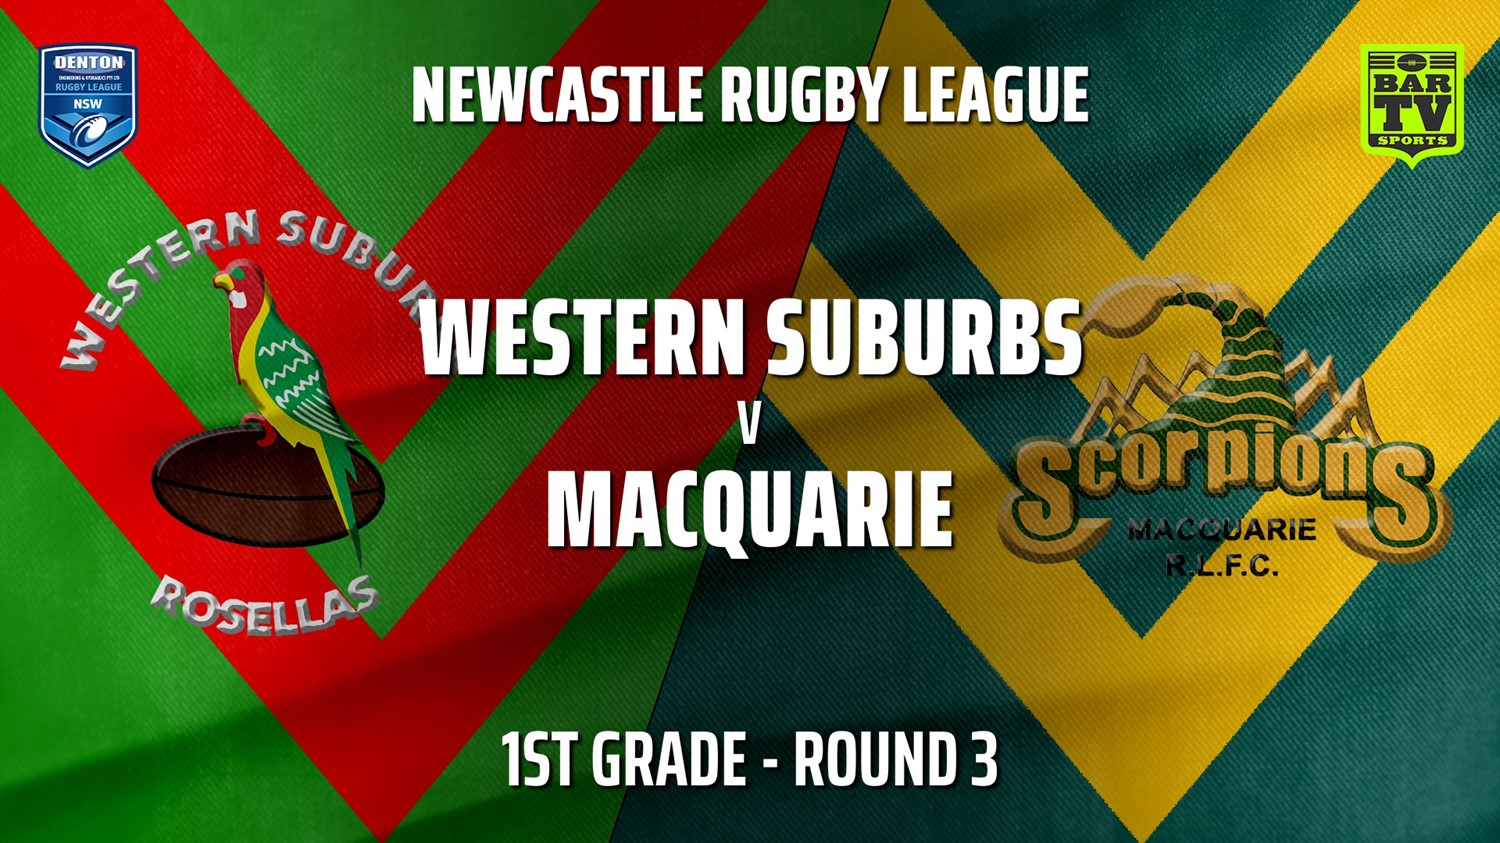 Newcastle Rugby League Round 3 - 1st Grade - Western Suburbs Rosellas v Macquarie Scorpions Slate Image